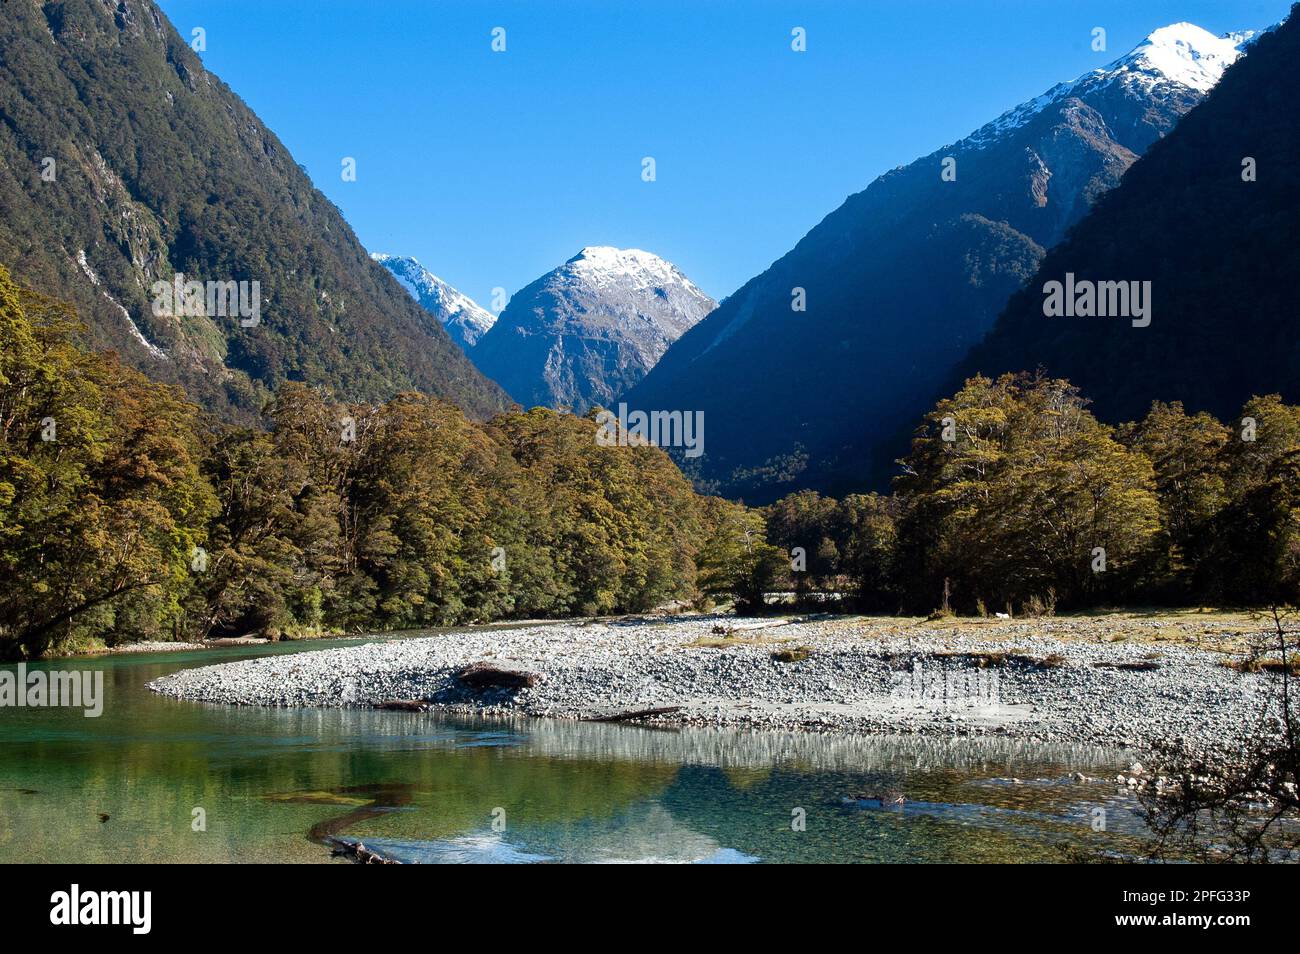 View of the Clinton river along the Milford track, New Zealand South Island . Milford Track is known as the most beautiful walk in the world. Stock Photo